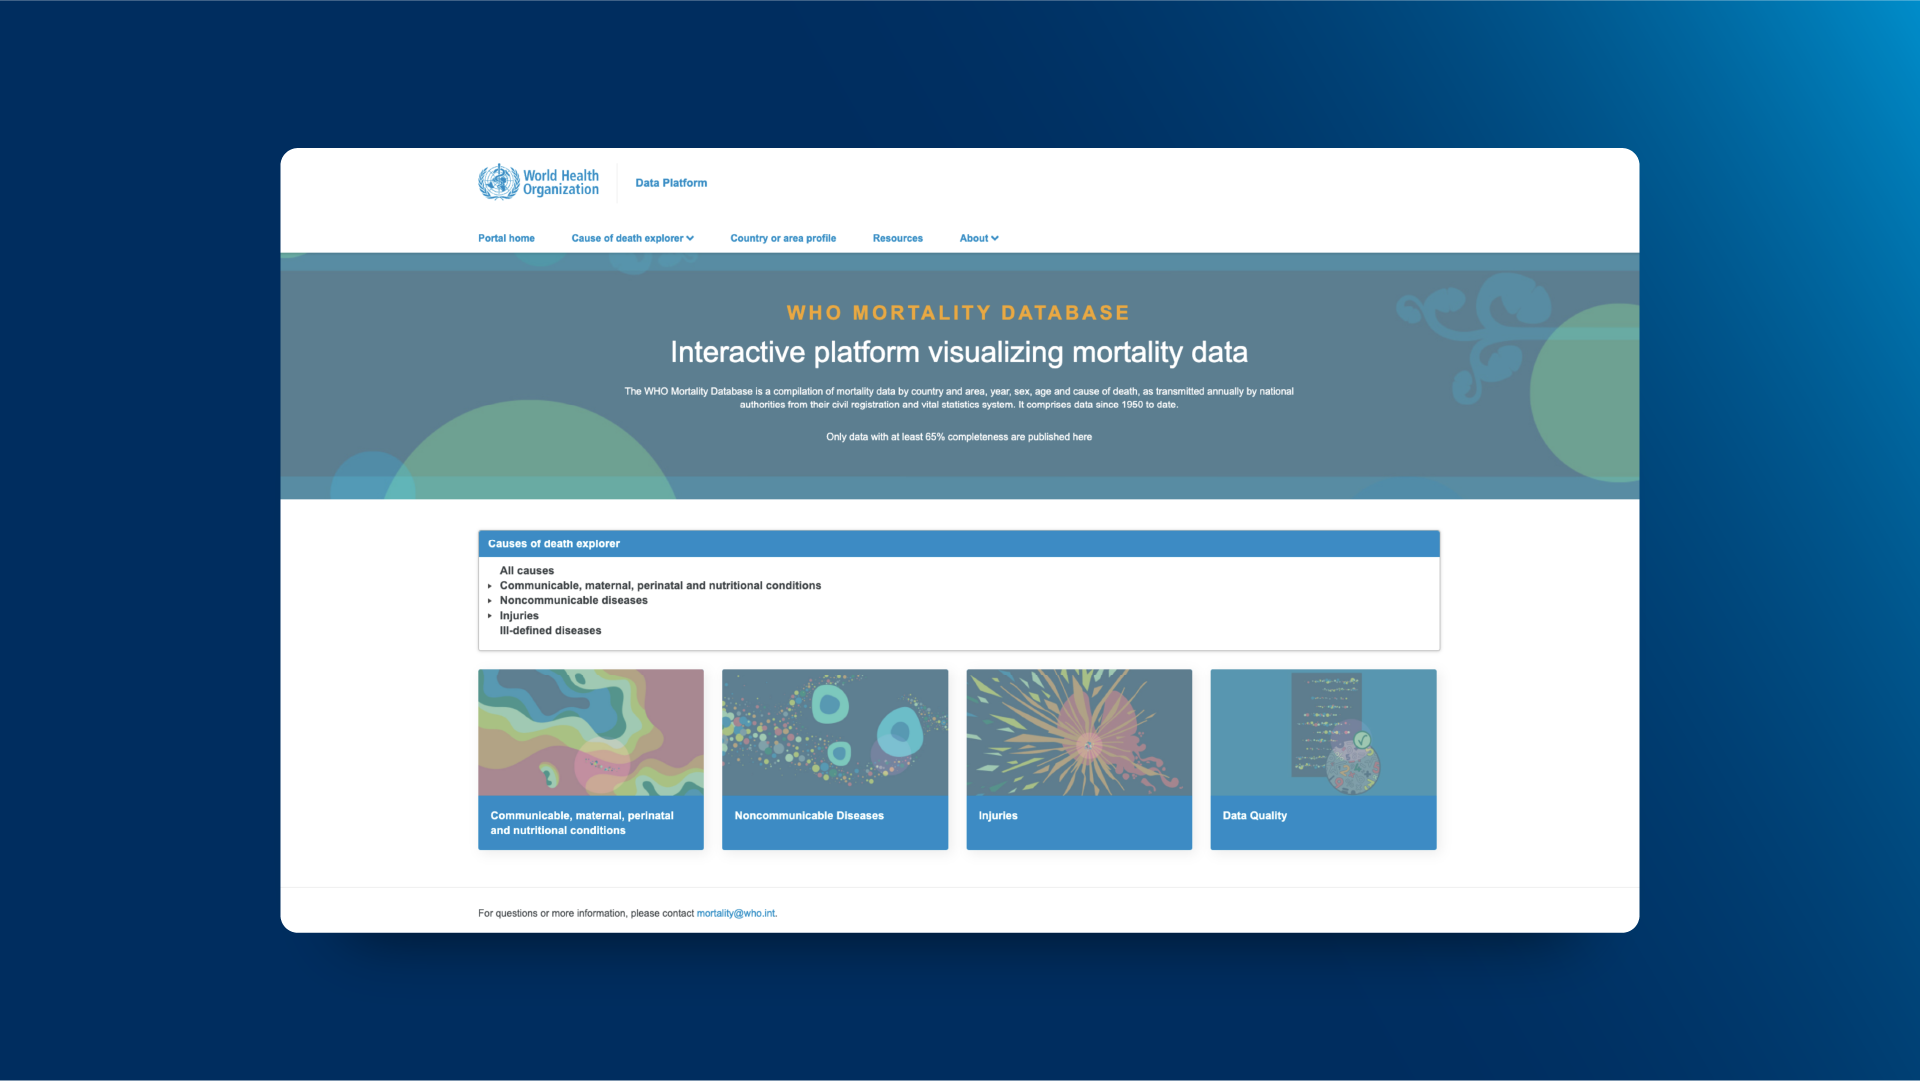 Image of the homepage of the WHO Mortality Database website.